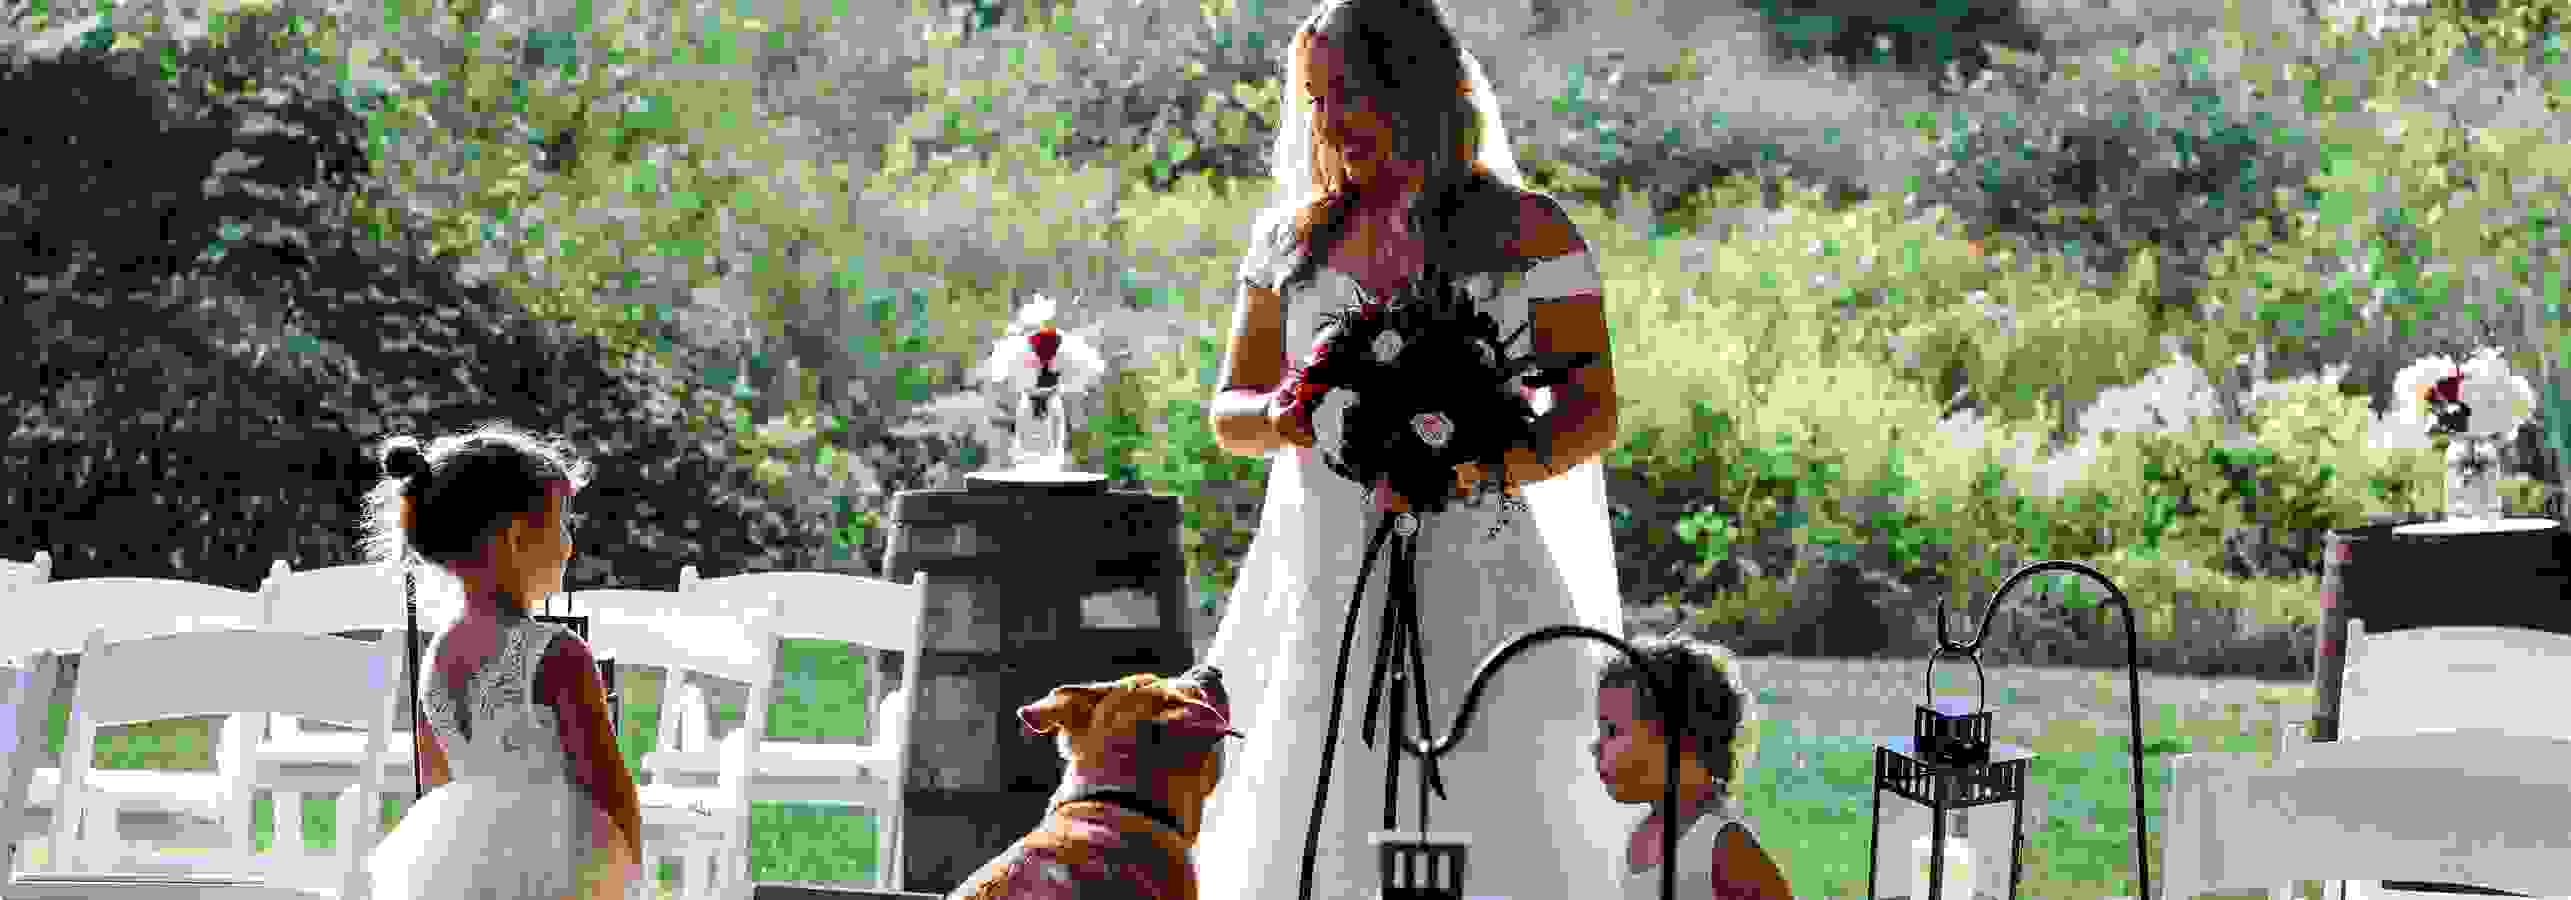 A bride at a wedding ceremony with a dog